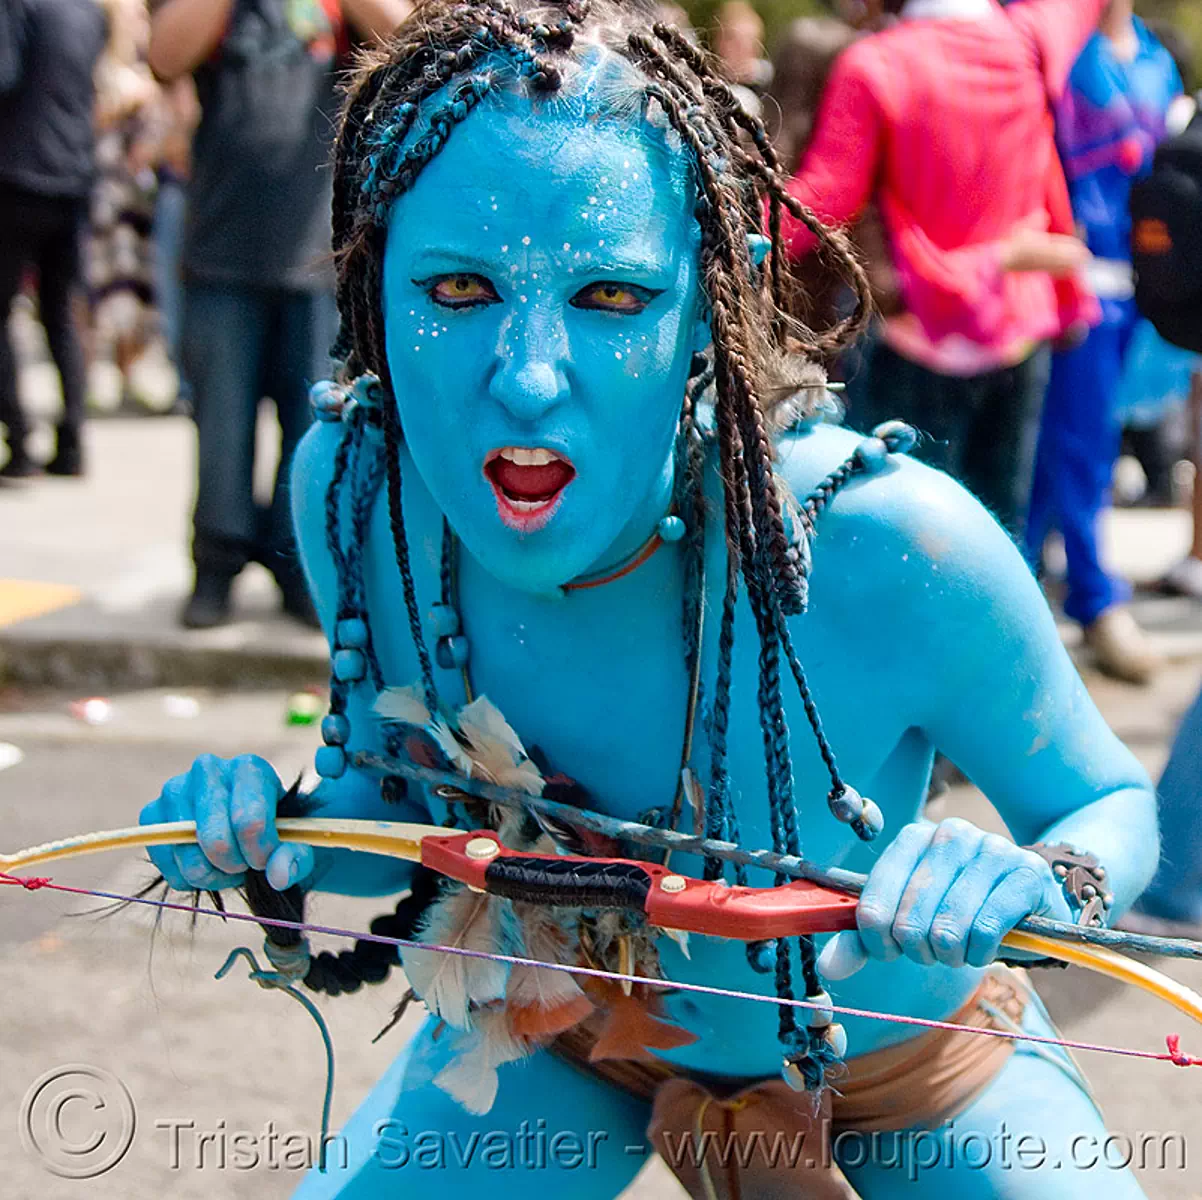 avatar costume - bay to breaker footrace and street party (san francisco), avatar, bay to breakers, beads, blue, body art, body paint, body painting, bow, braid, braided hair, contacts, costume, footrace, special effects contact lenses, street party, theatrical contact lenses, warrior, woman, yellow color contact lenses